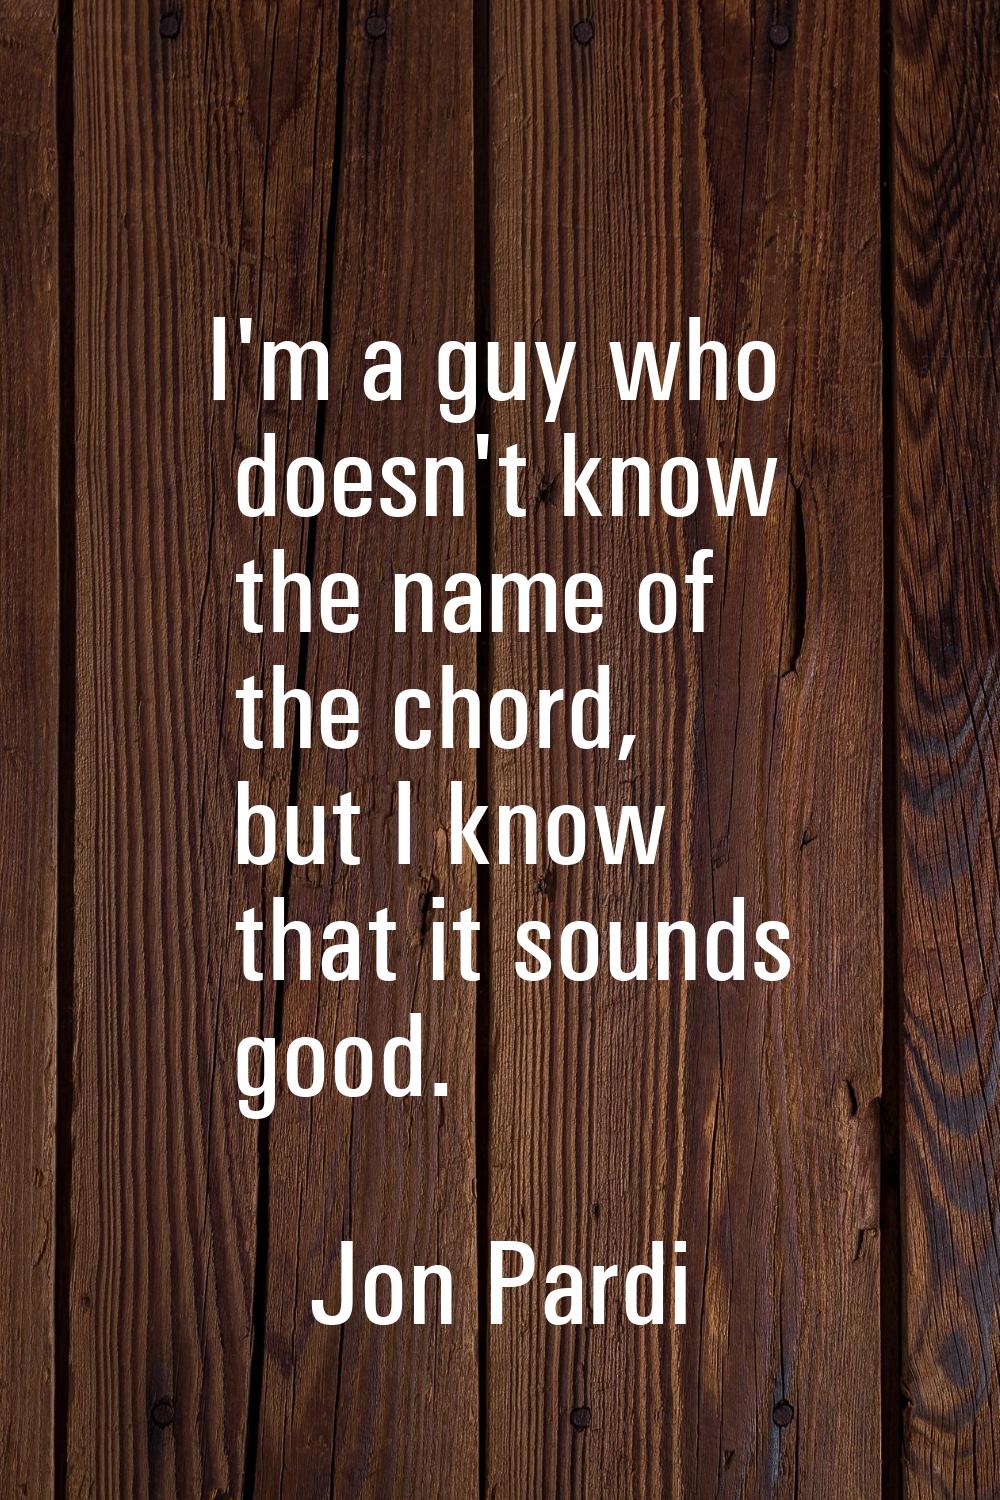 I'm a guy who doesn't know the name of the chord, but I know that it sounds good.